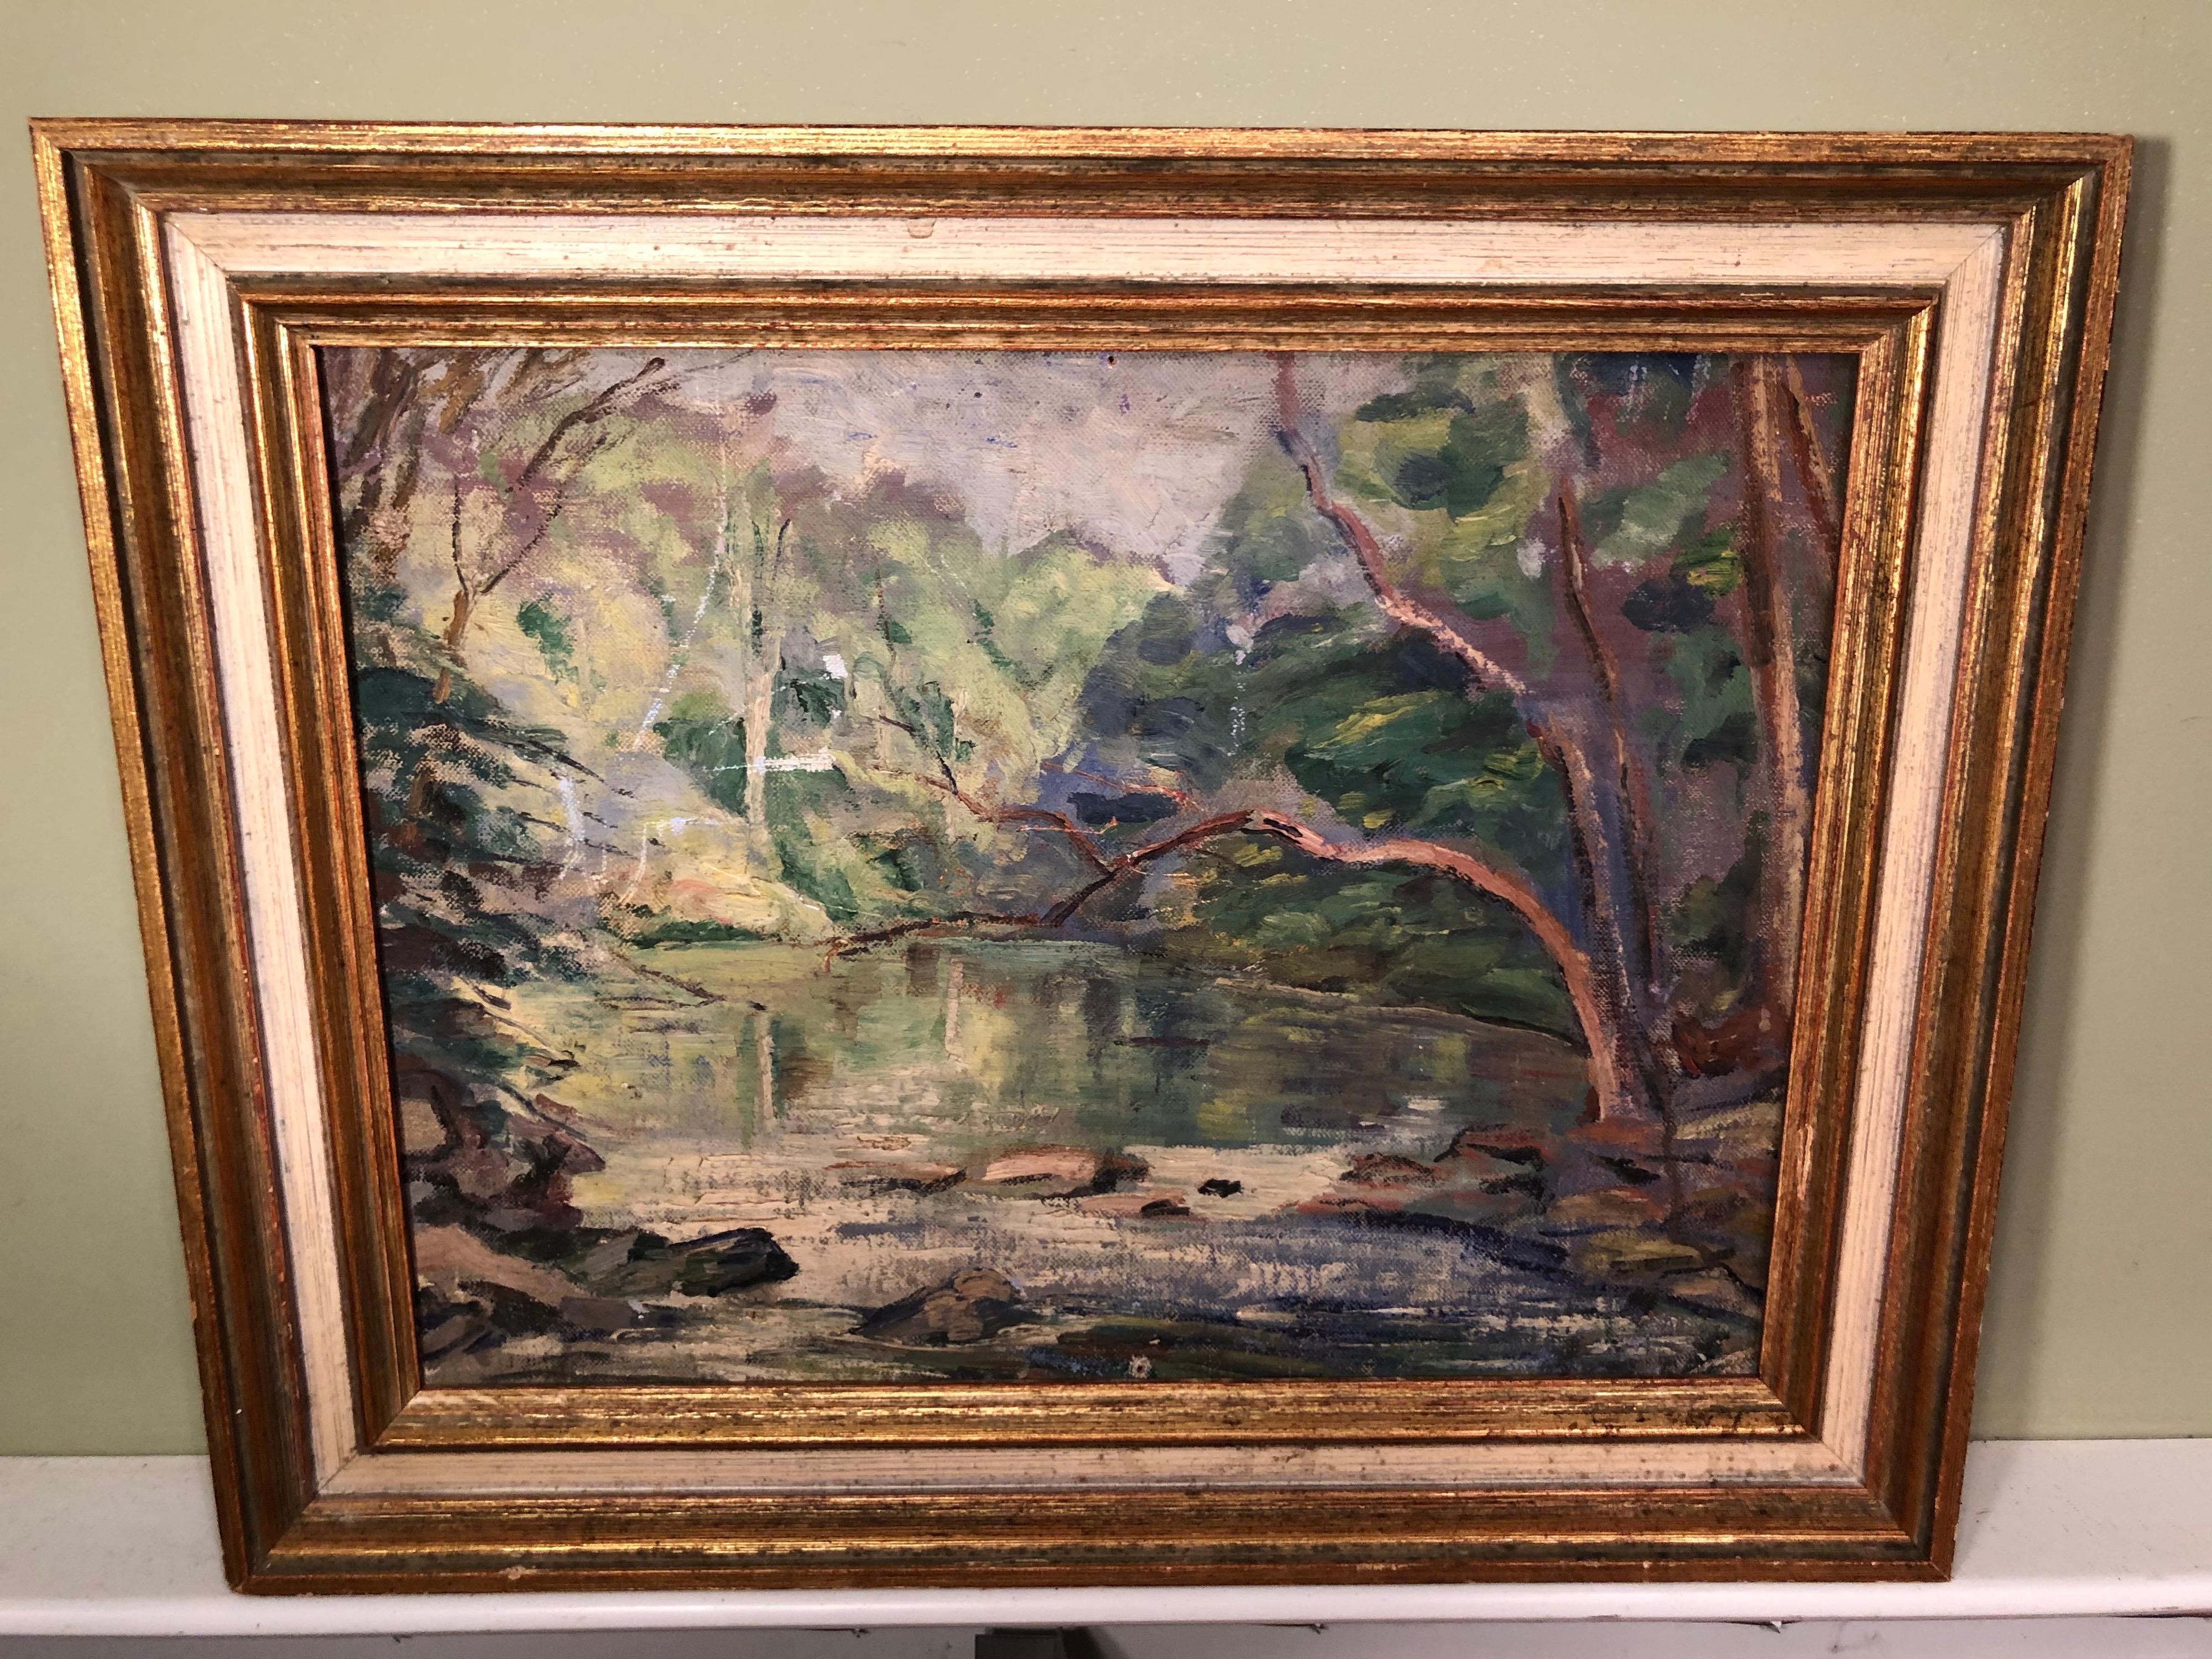 Early 20th century painting of a stream. This sweet bucolic and idyllic setting brings a lot of peace to the viewer. Framed in a solid wooden frame.